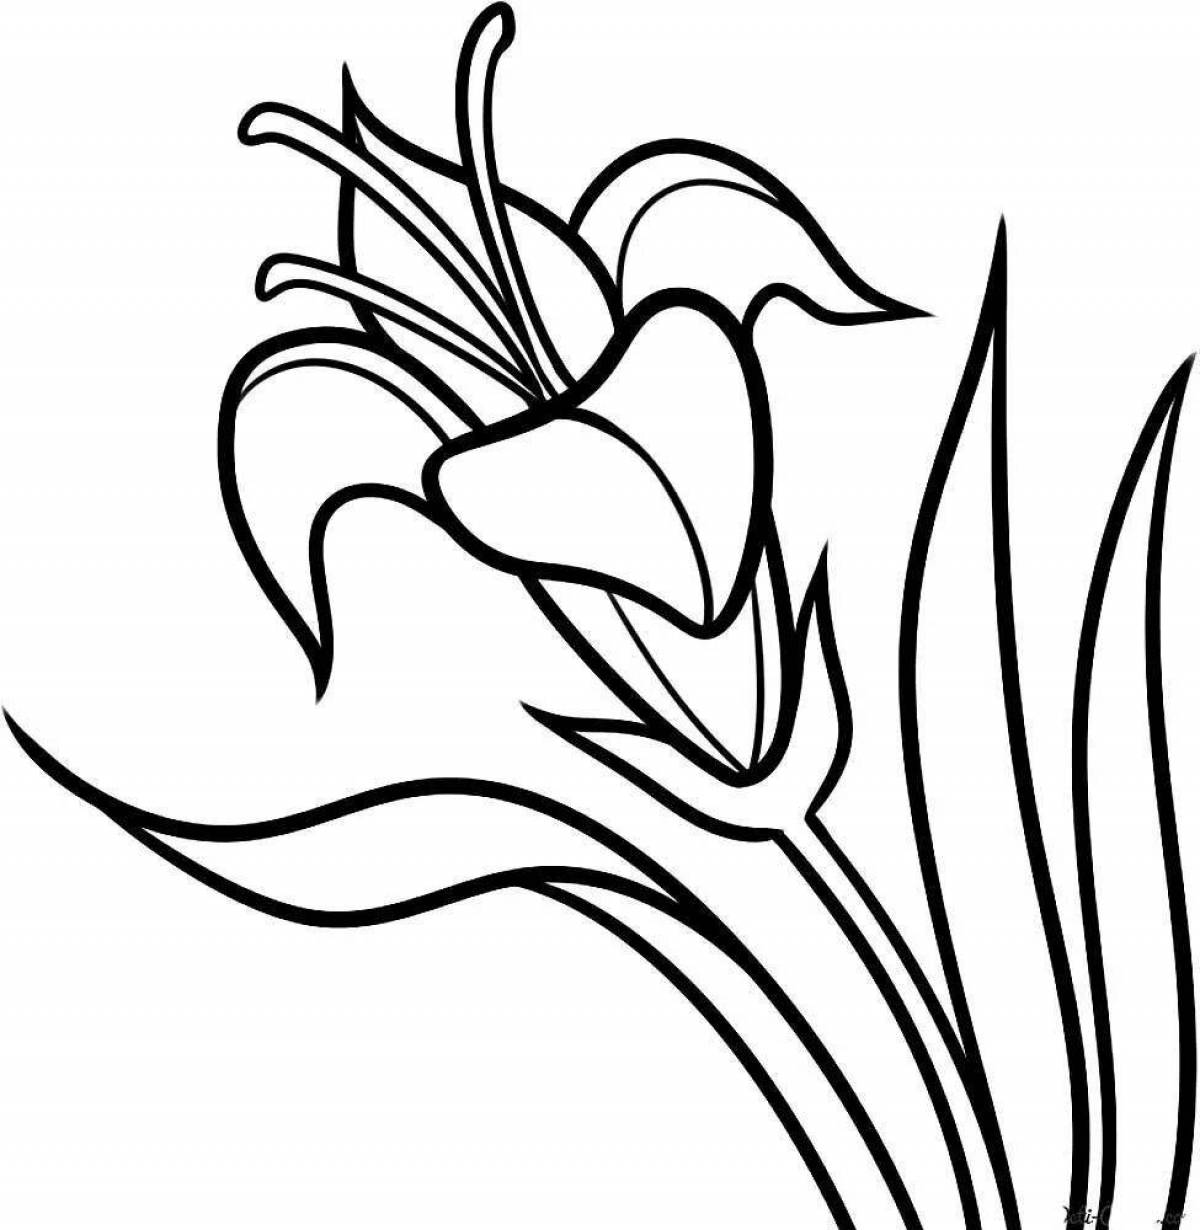 Coloring book shining lily for children